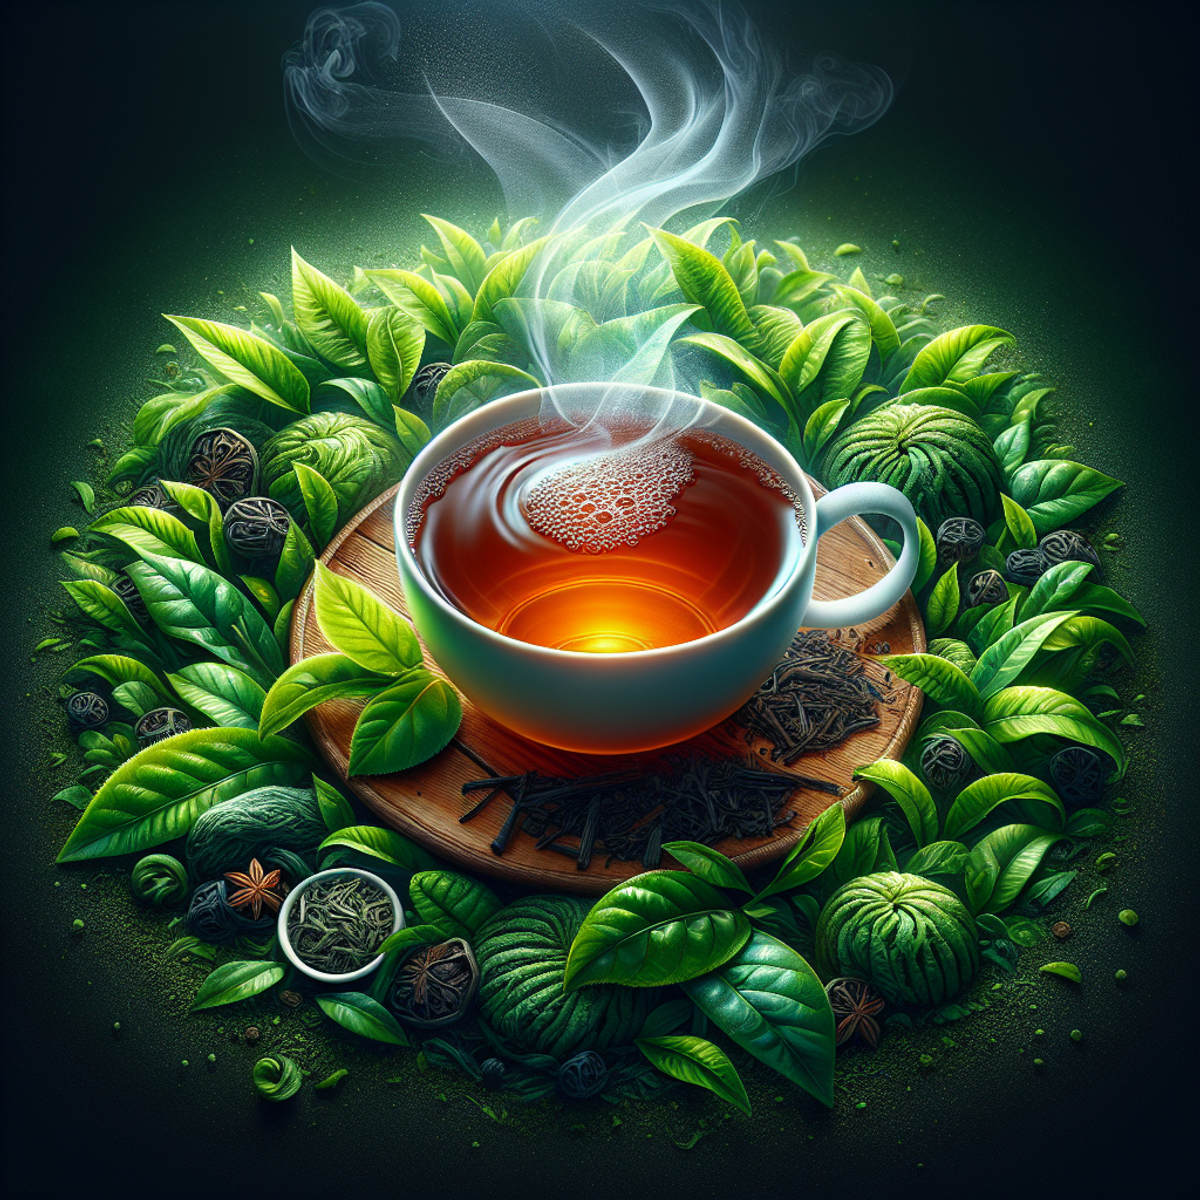 Steaming cup of organic tea surrounded by lush green tea leaves.